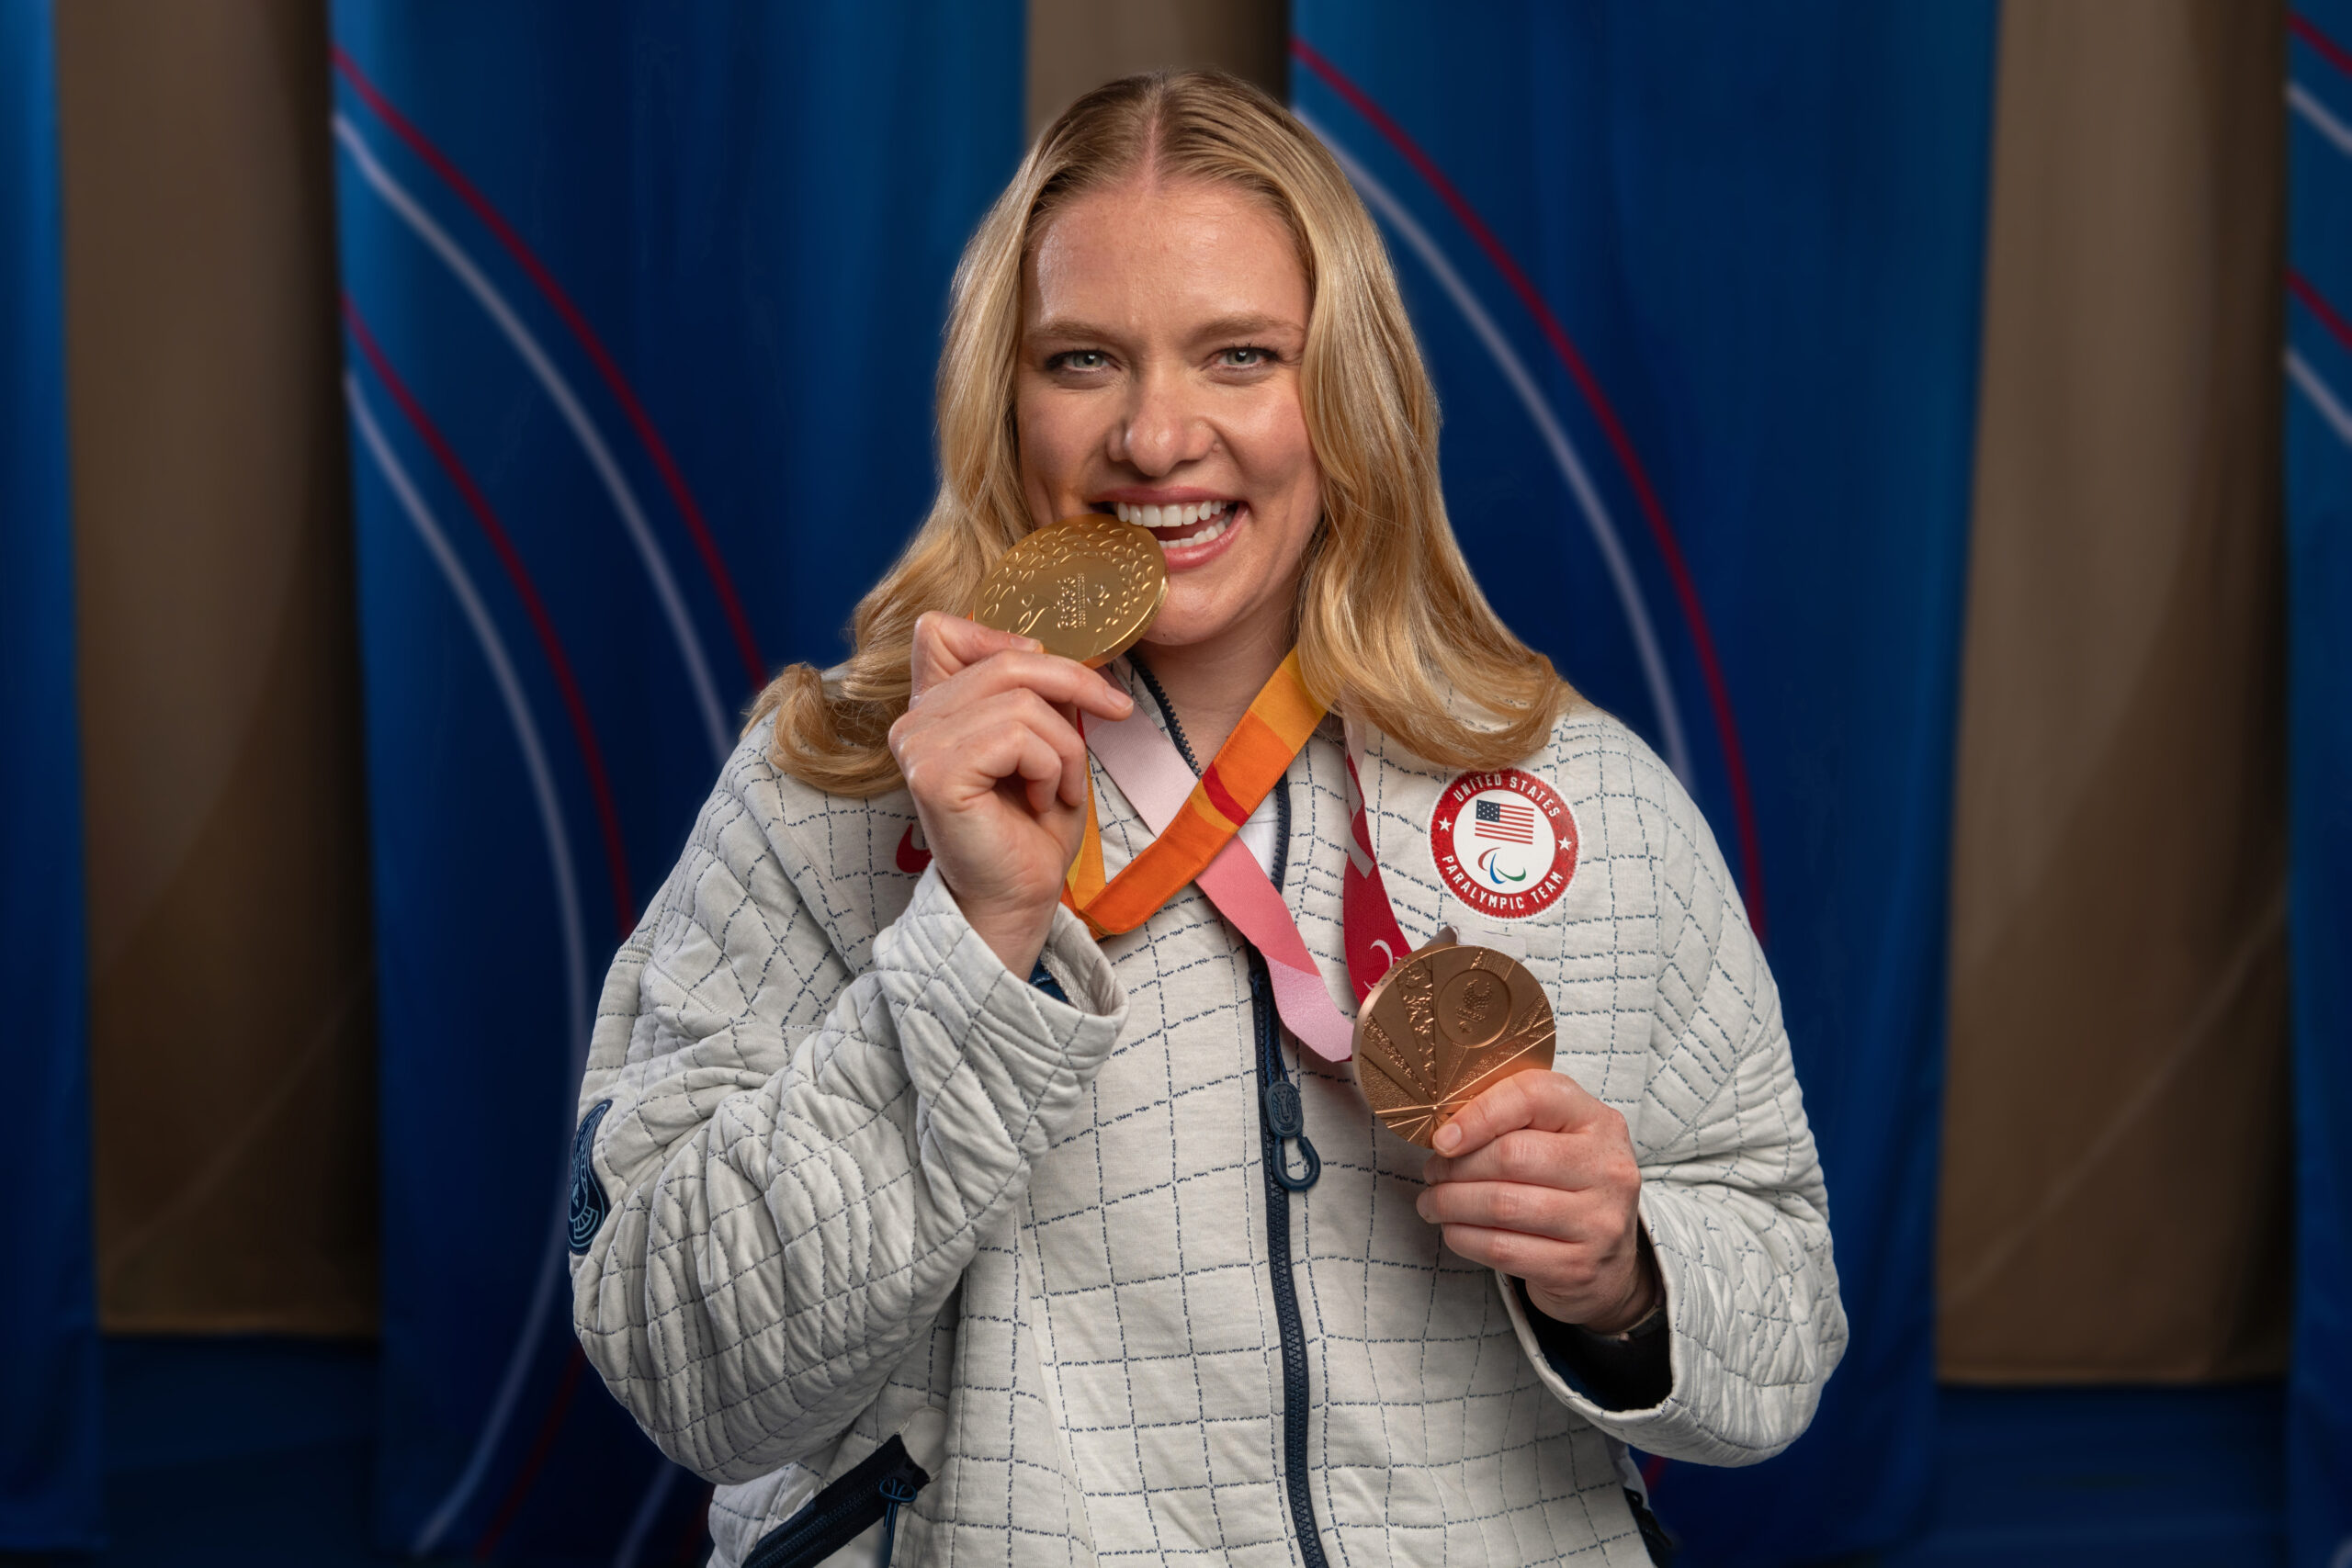 Hollermann wears both her Paralympic medals and bites the gold one.